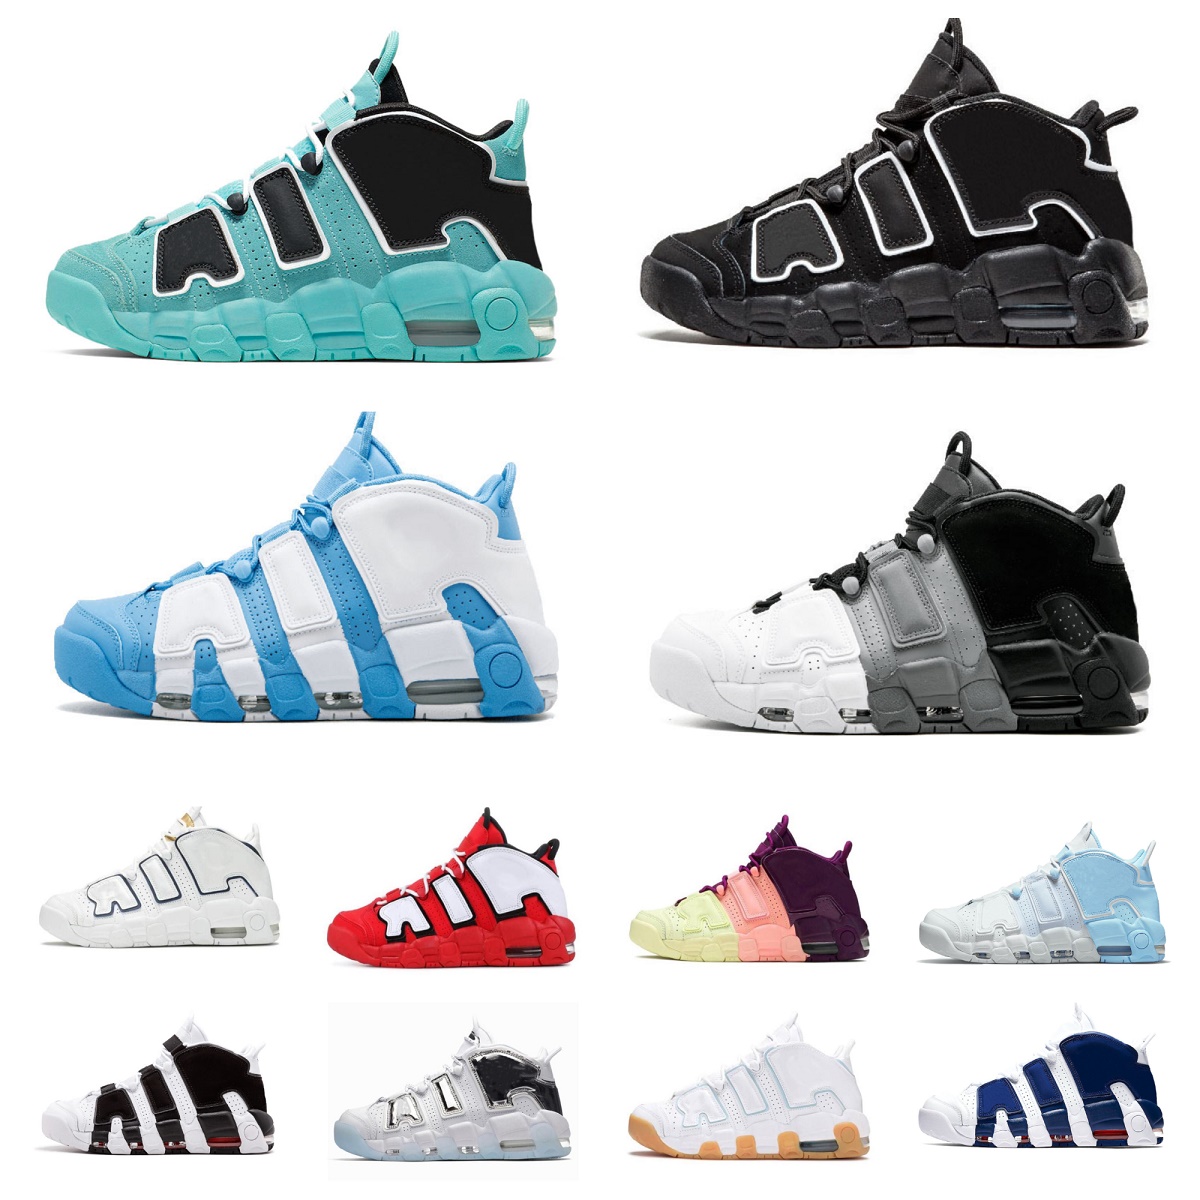 

Basketball Shoes Mens More Uptempos 96 Airs Total Max Scottie Pippen White Varsity Red Green Black Bulls University Blue UNC USA UK Women Designer Trainers Sneakers, Bubble package bag